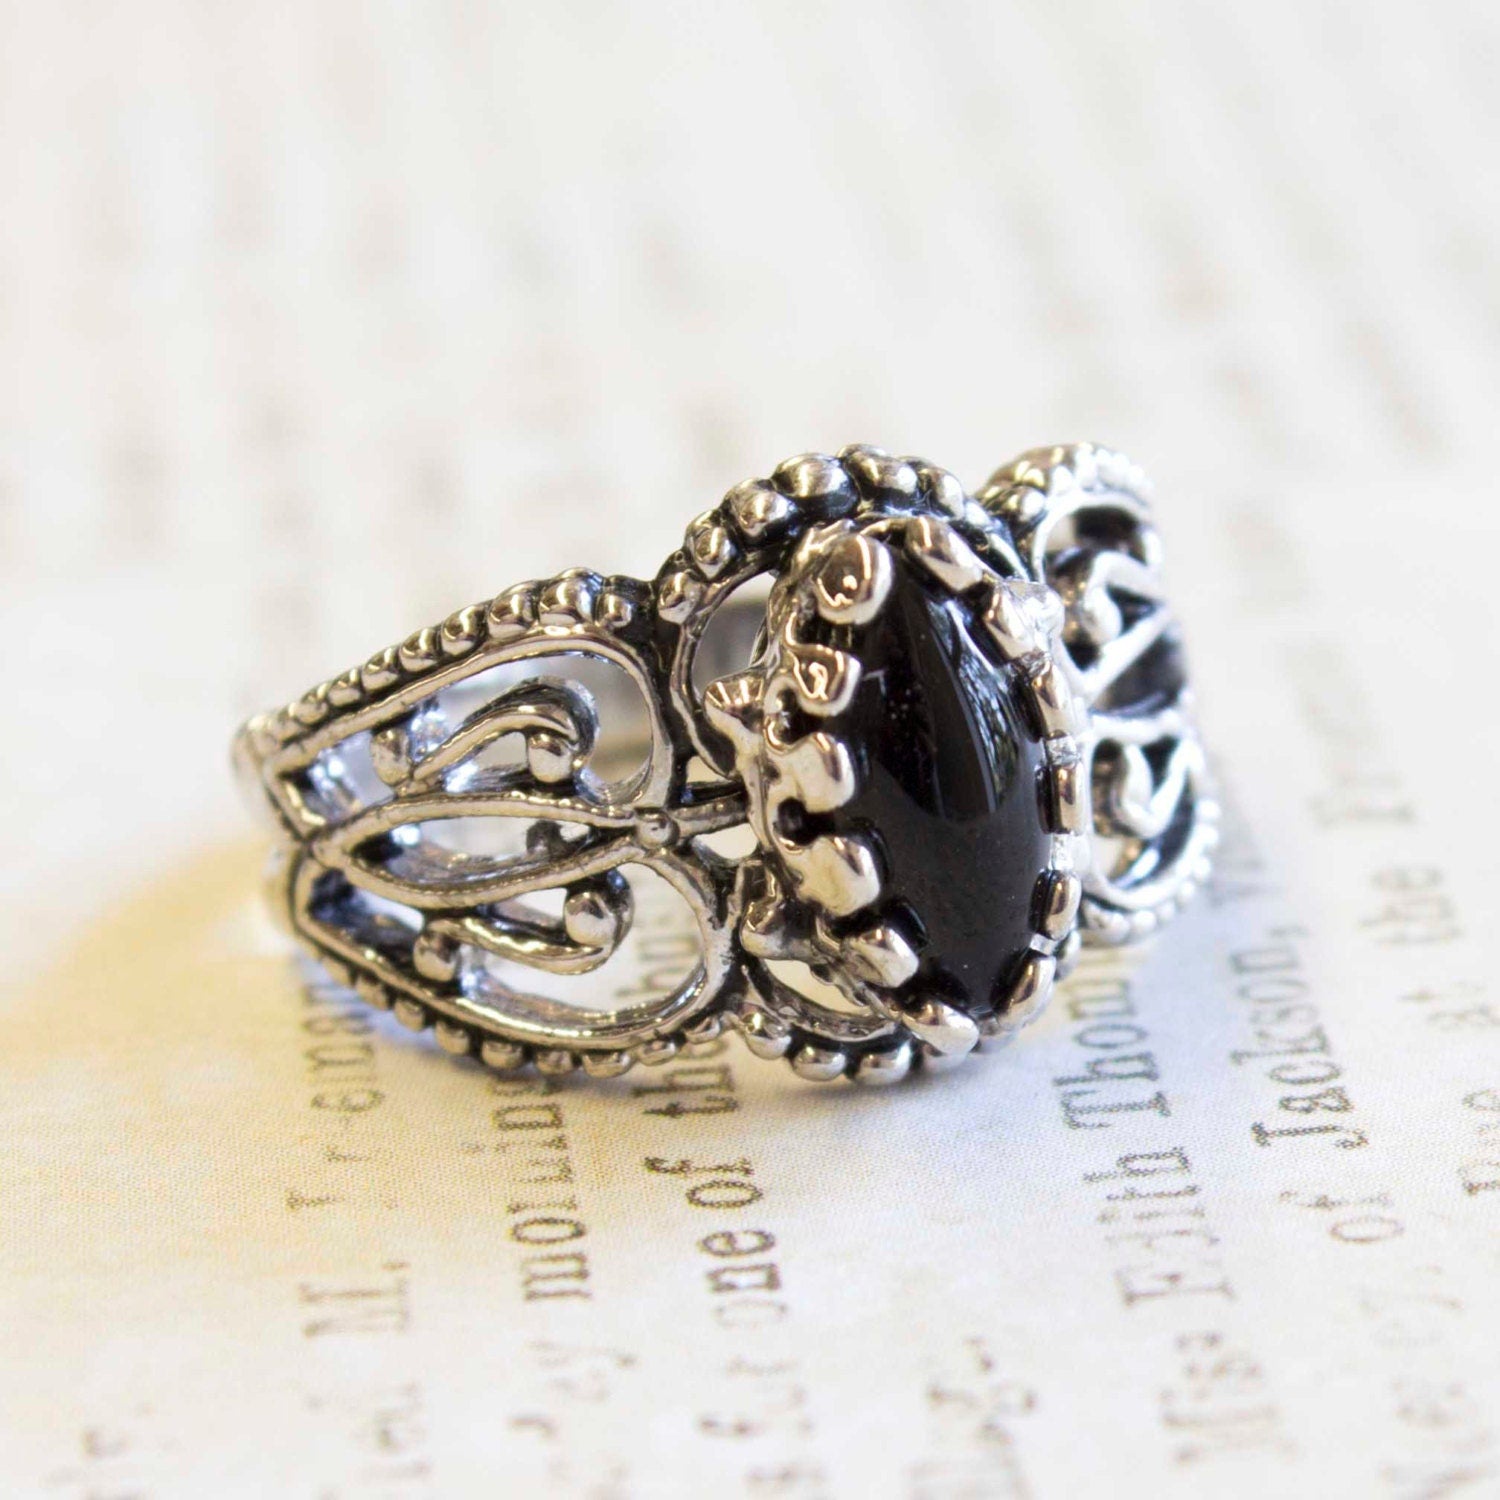 Vintage Ring Genuine Onyx Filigree Style 18k White Gold Silver Ring #R144 - Limited Stock - Never Worn